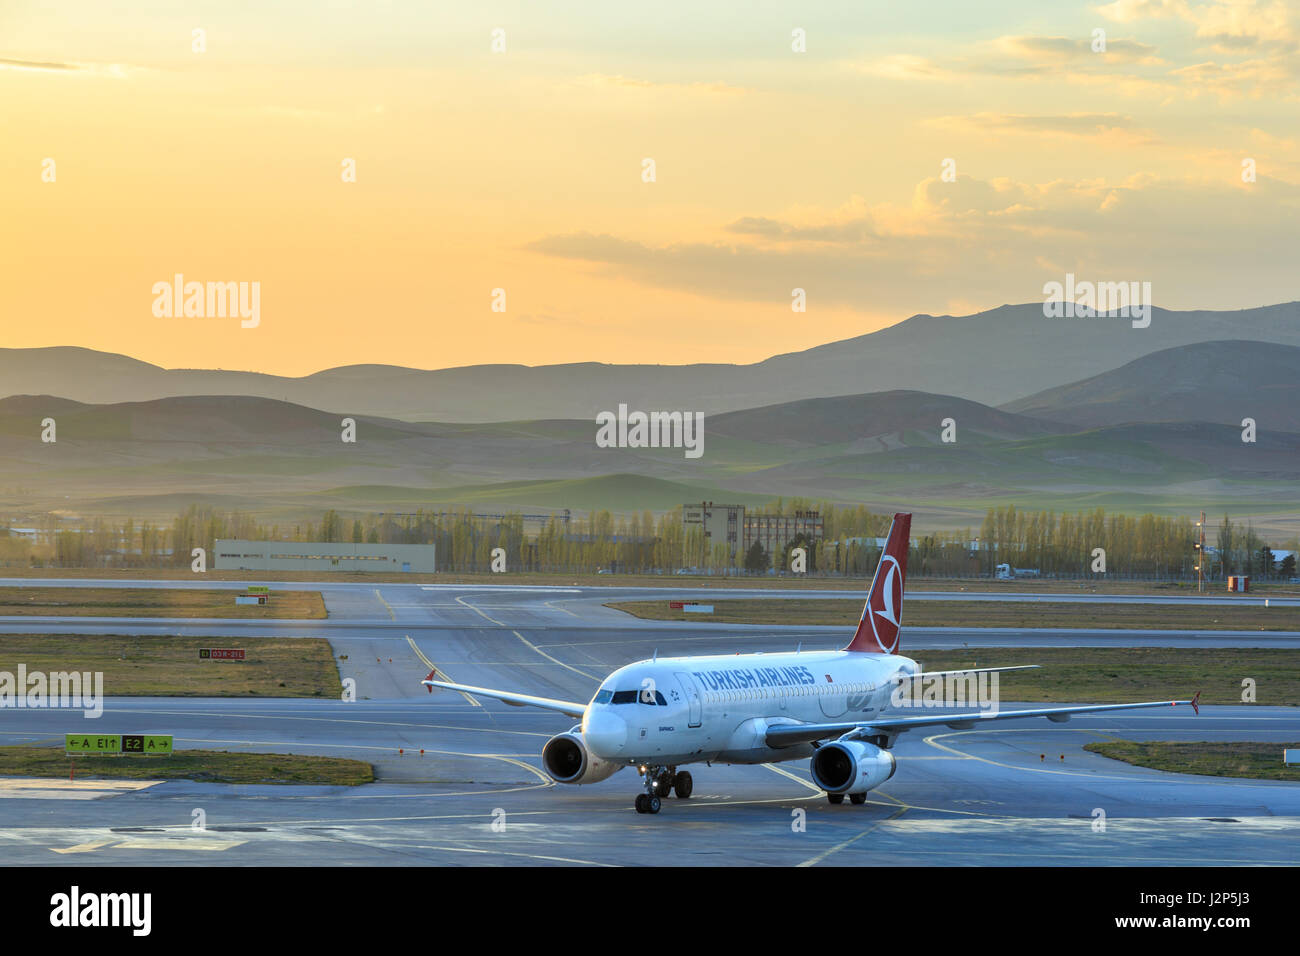 At Esenboga airport in Ankara, Turkey - April 29, 2017 : Turkish airlines plane inside the Esenboga airport during sunset Stock Photo